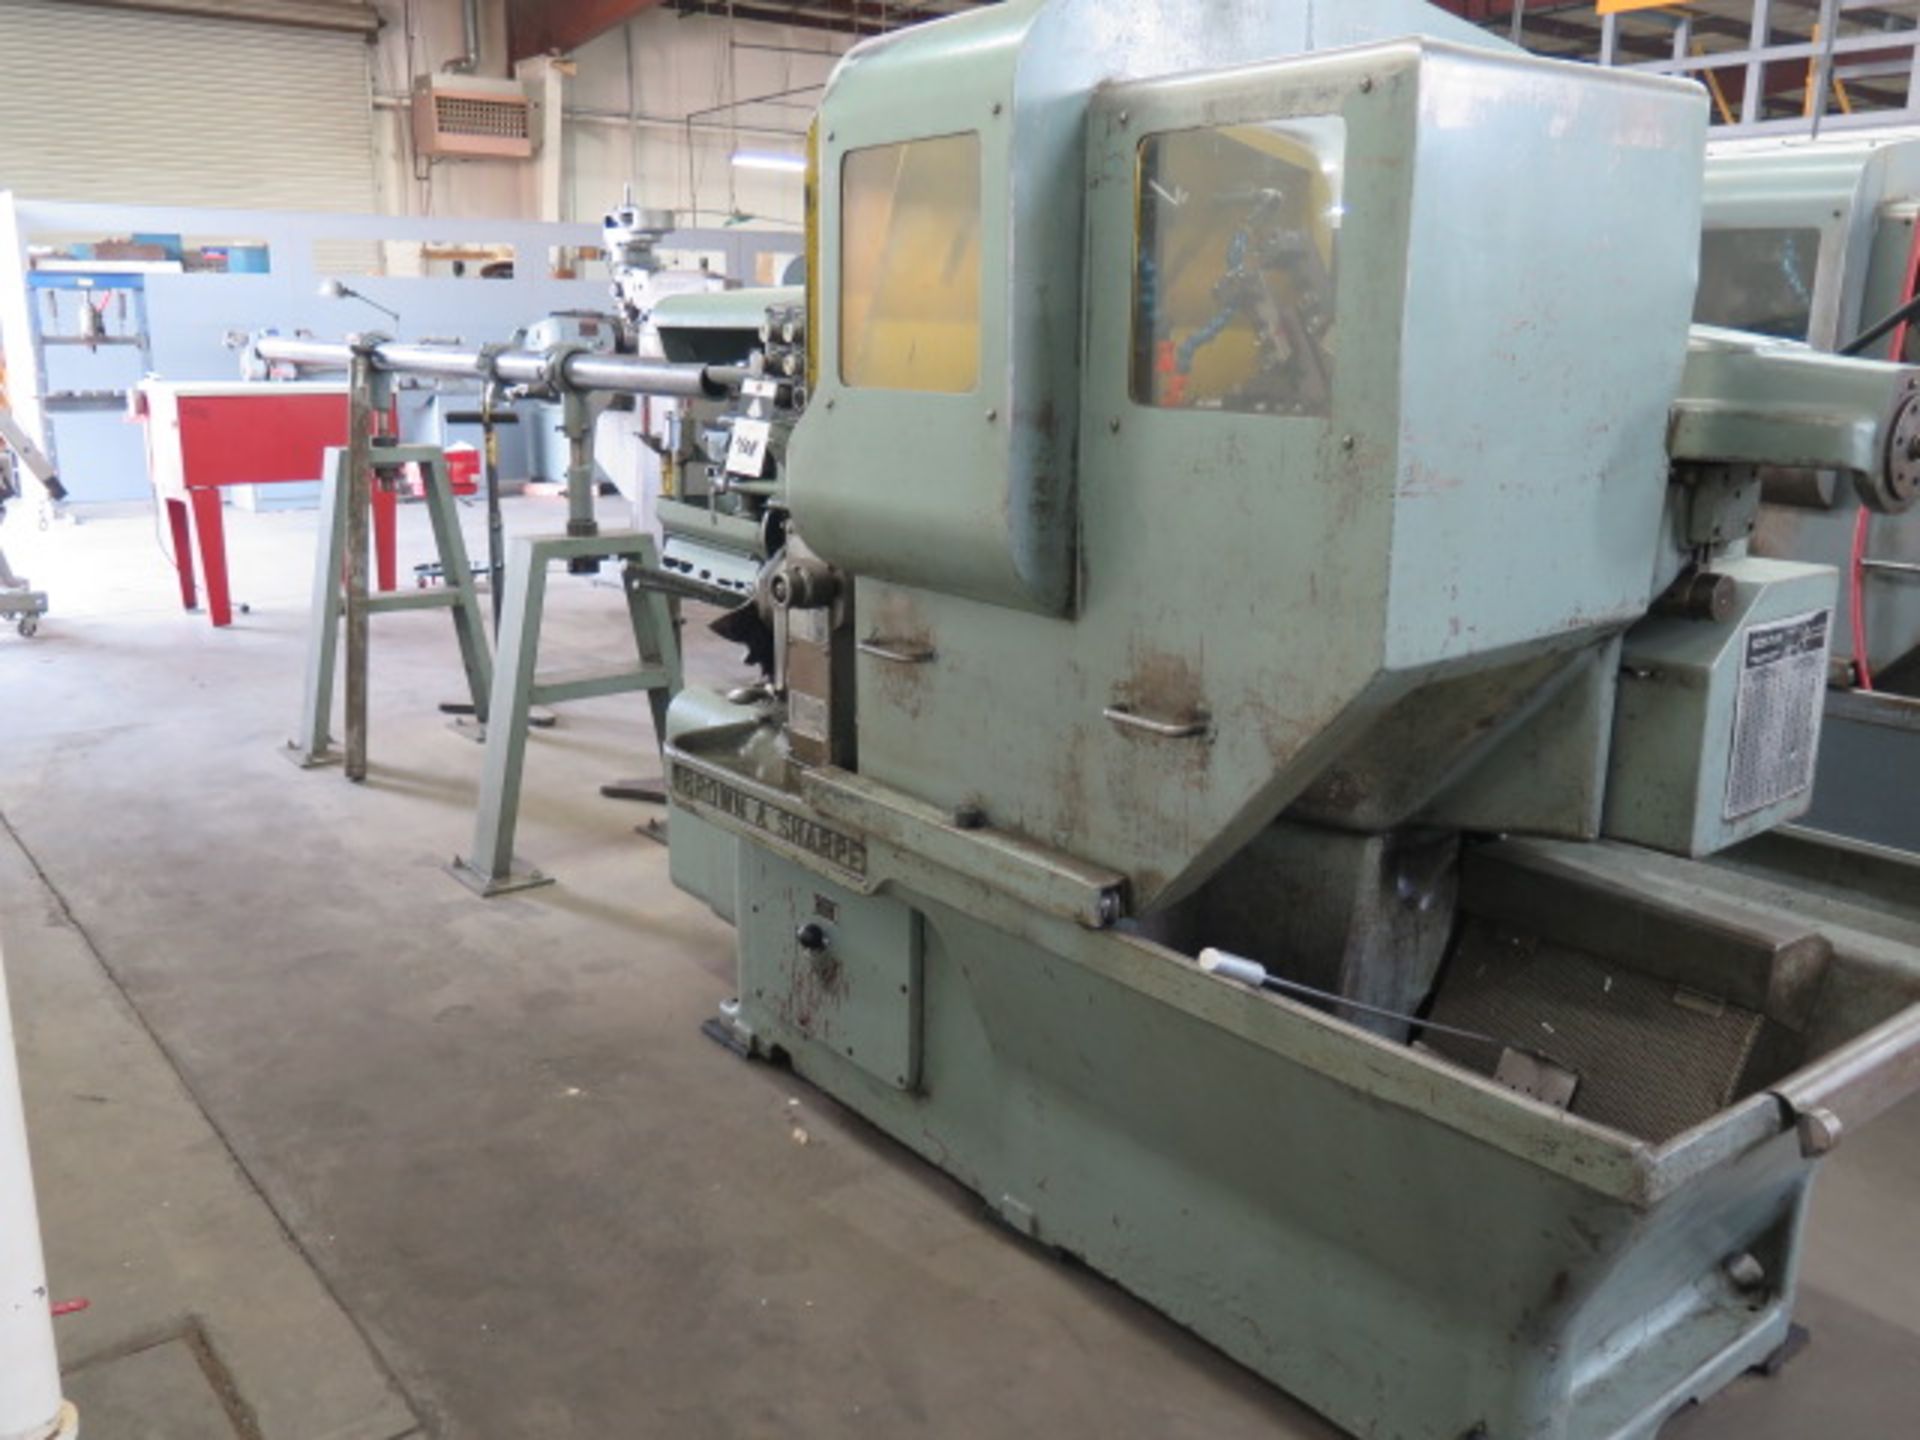 Brown & Sharpe No. 4 Automatic Screw Machine w/ 3-Cross Slides, Rotary Style Turret, SOLD AS IS